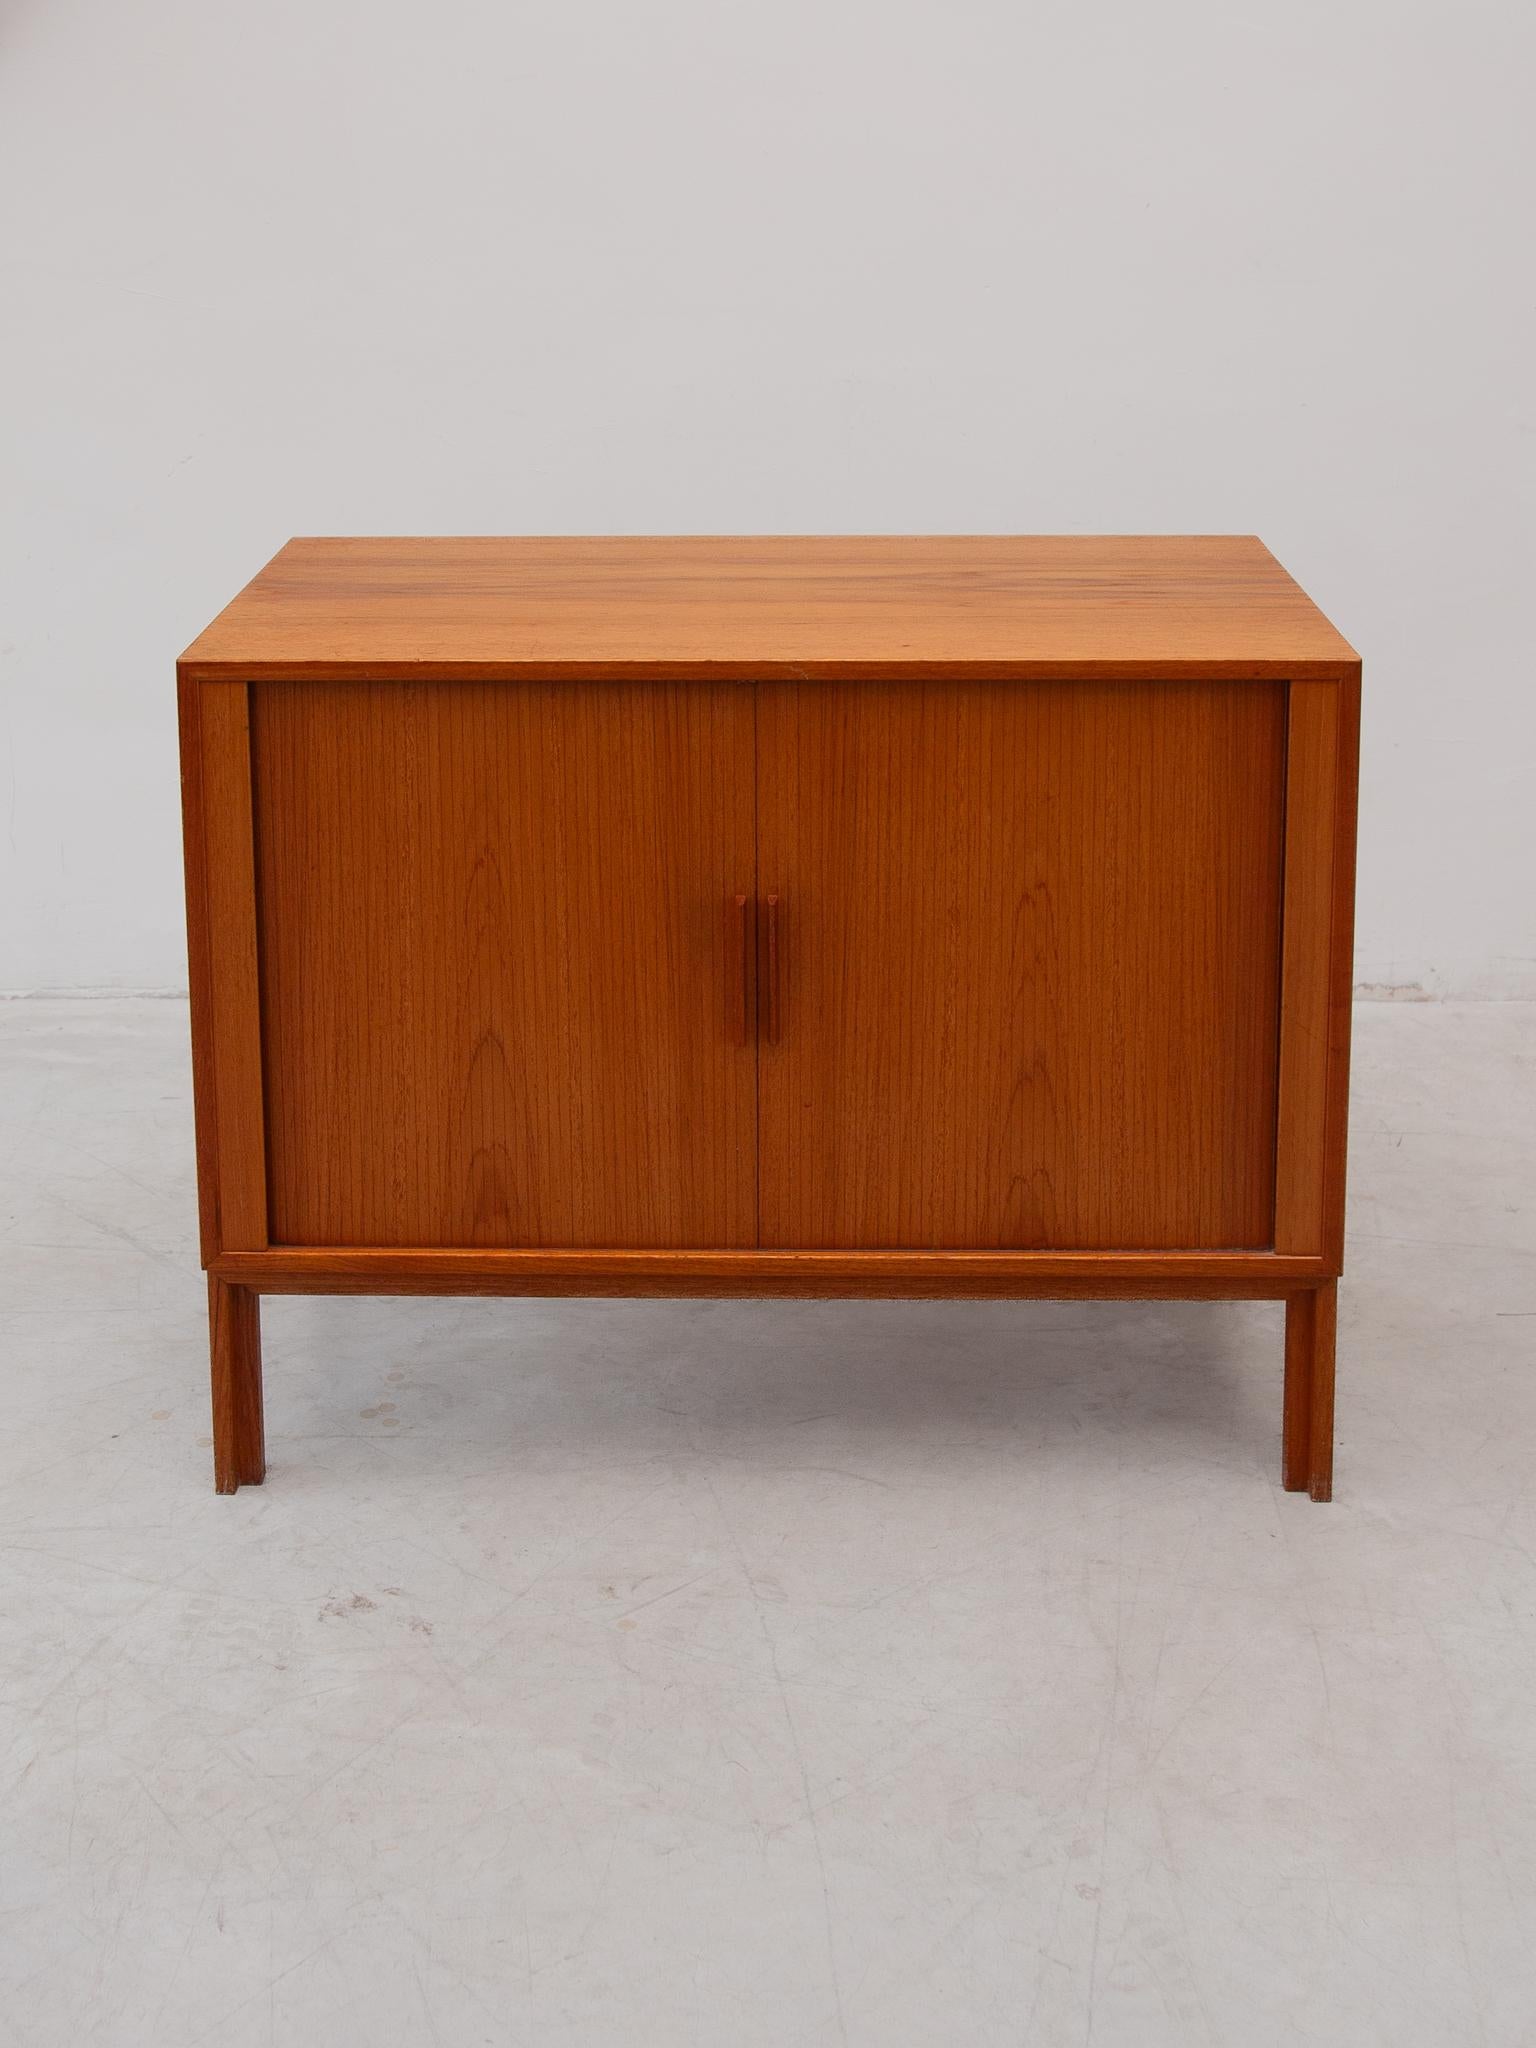 Modular Sideboard with Sliding Doors designed by Kai Kristiansen 1970s For Sale 1